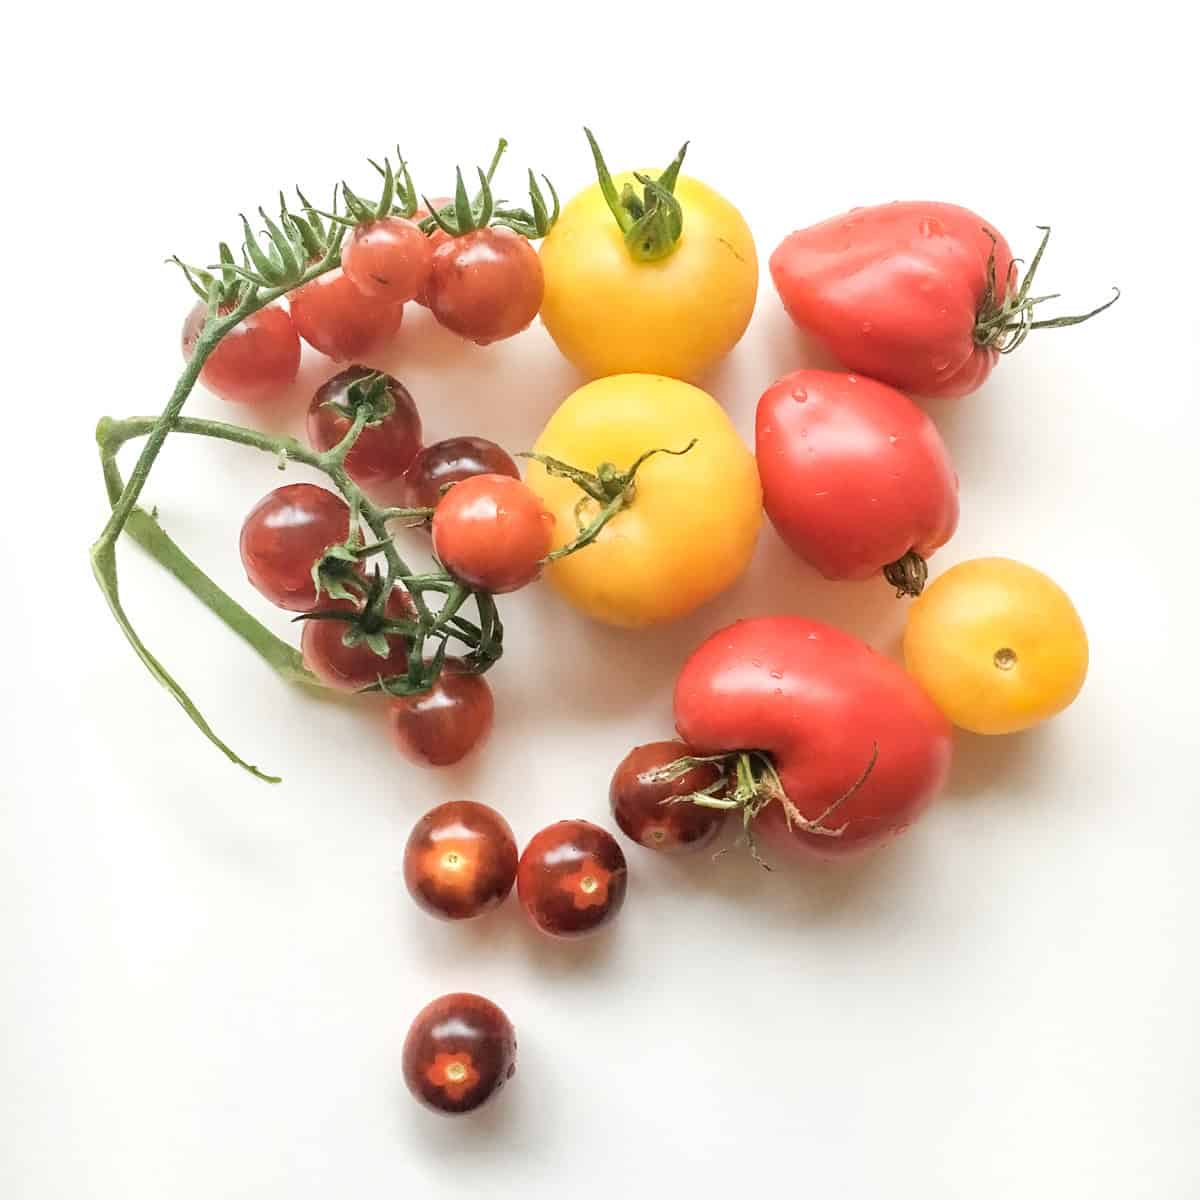 An image of a variety of tomatoes on a white countertop.